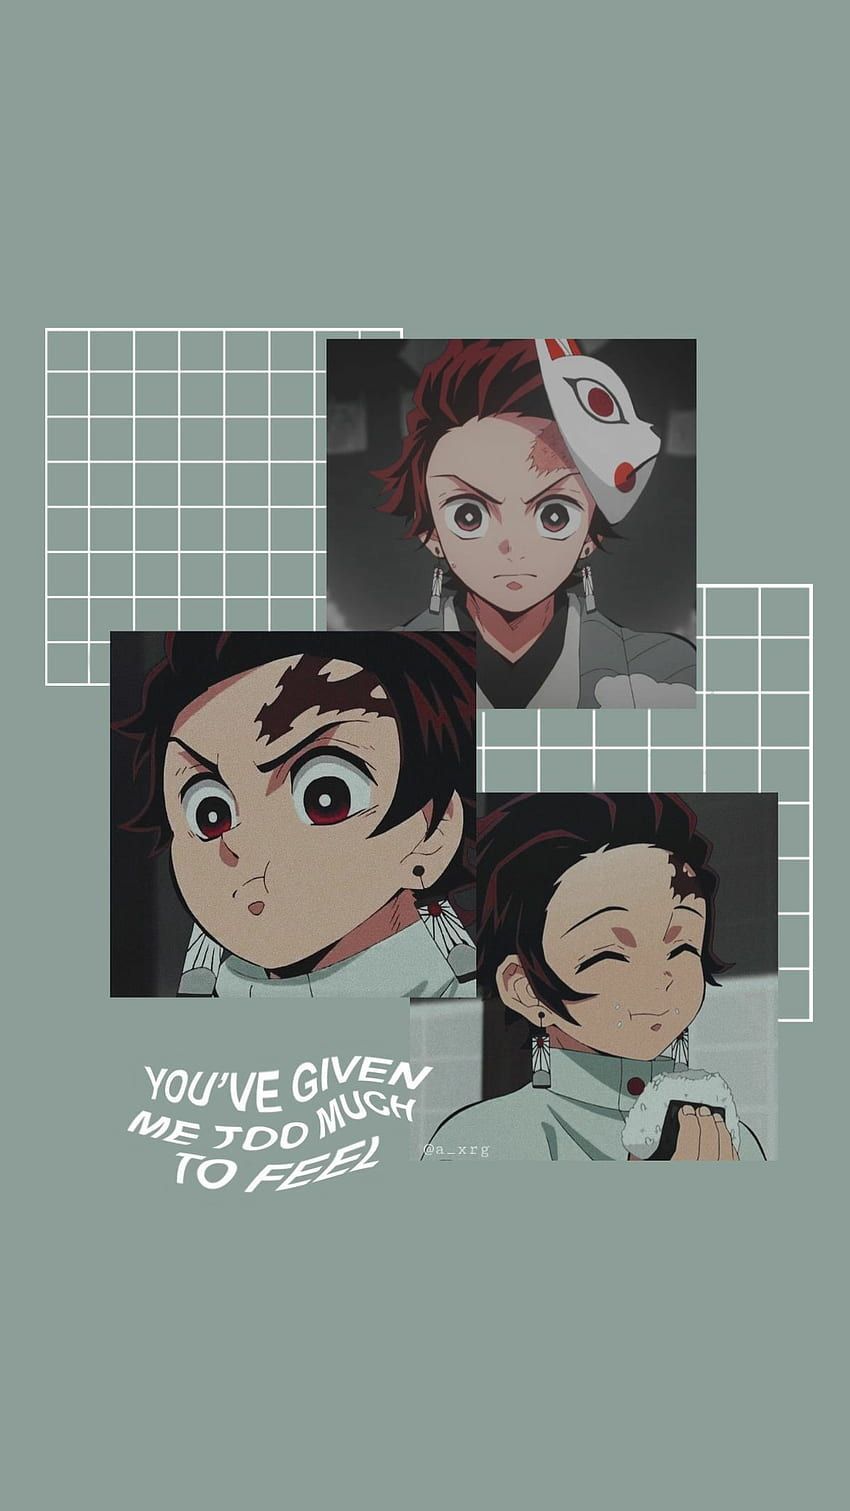 Demon Slayer anime phone background with 3 pictures of Tanjiro and his quote 